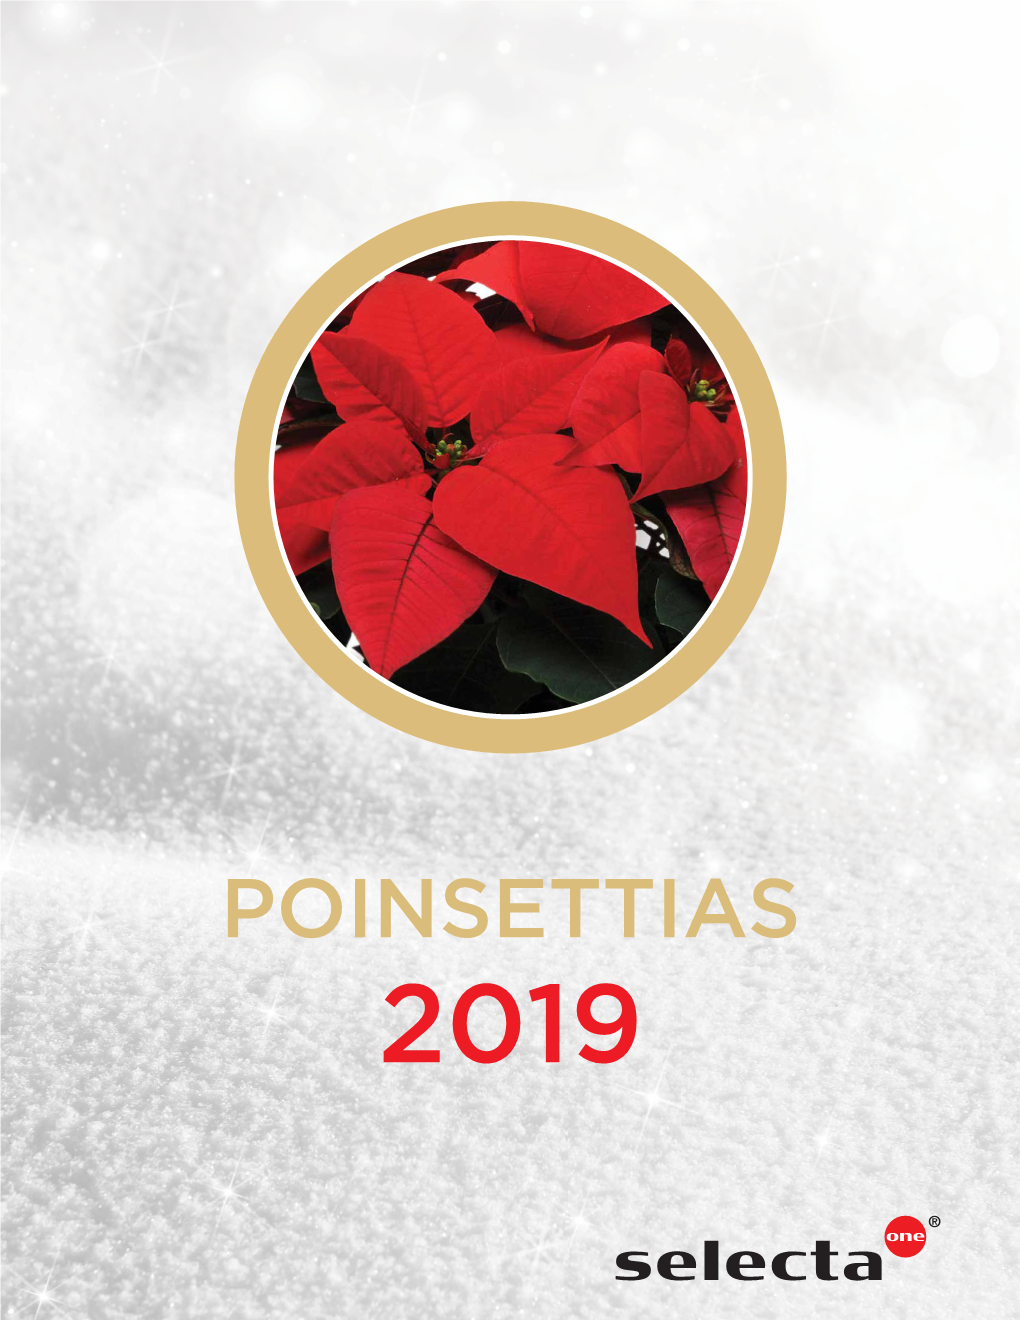 Poinsettias 2019 Number One Choice